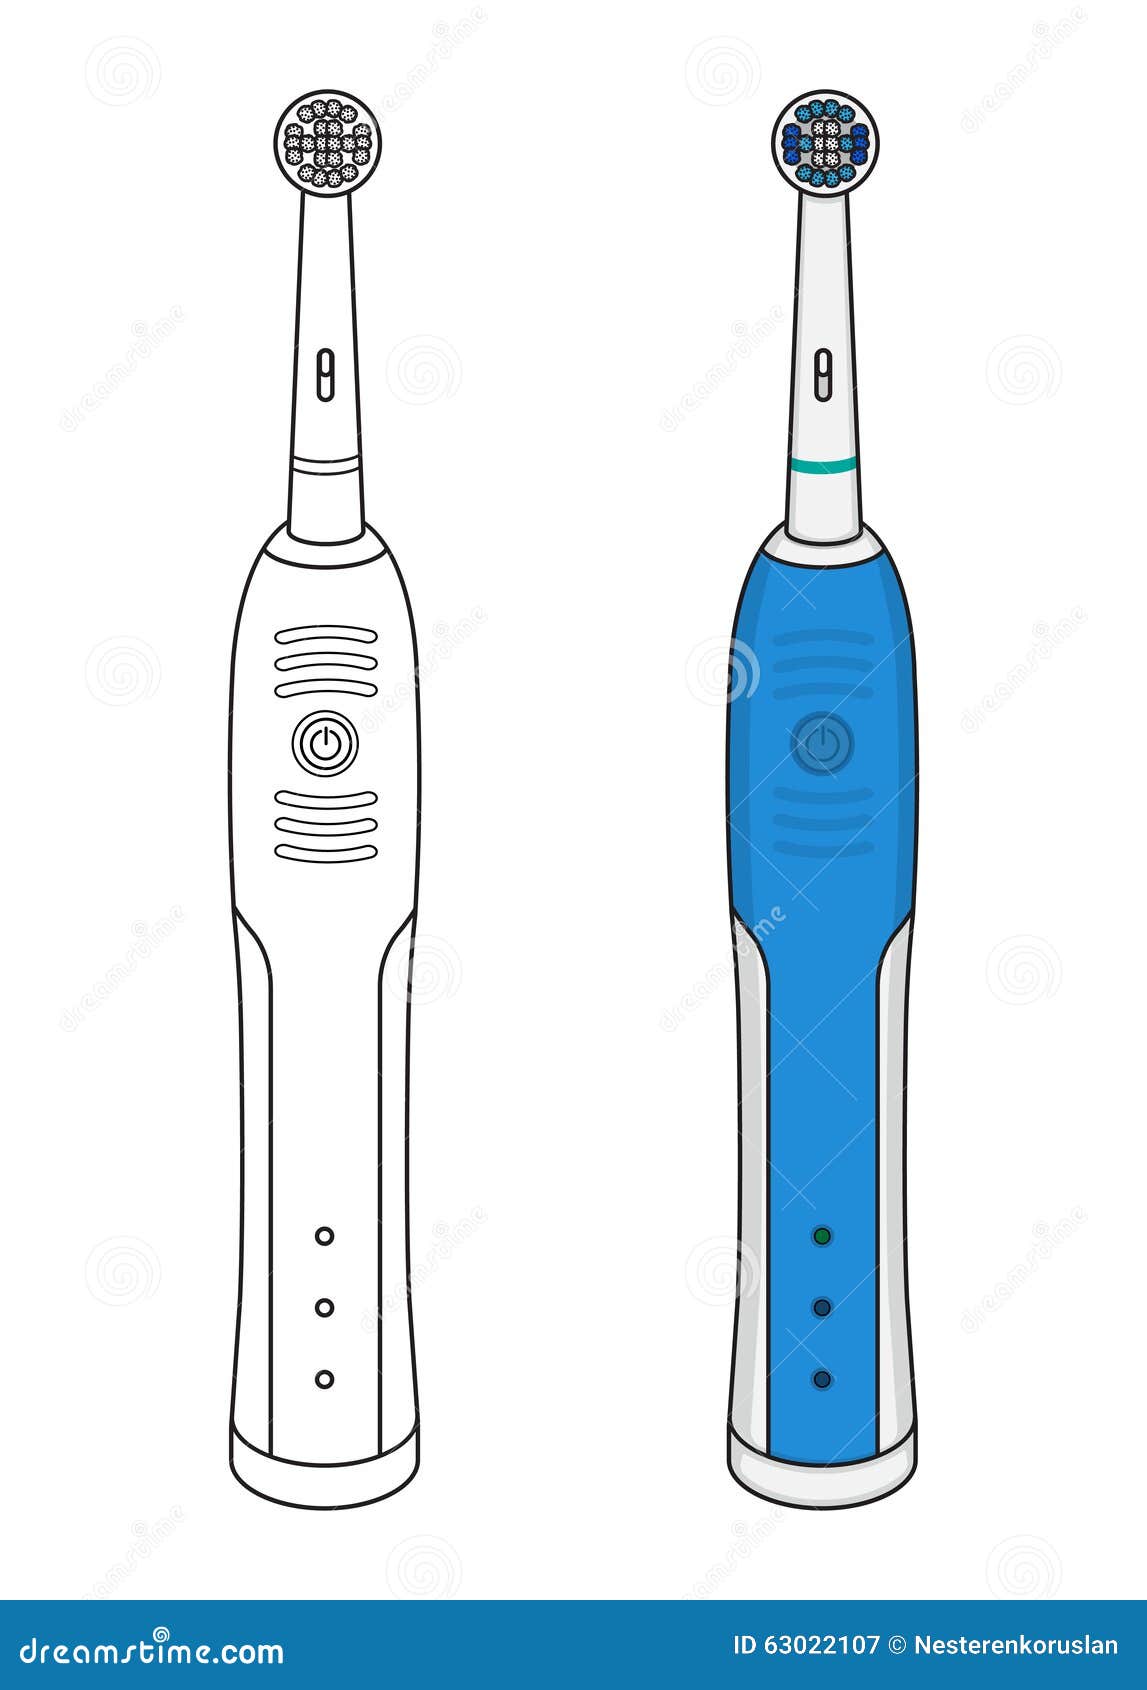 Electronic Toothbrush Design Sketches. on Behance